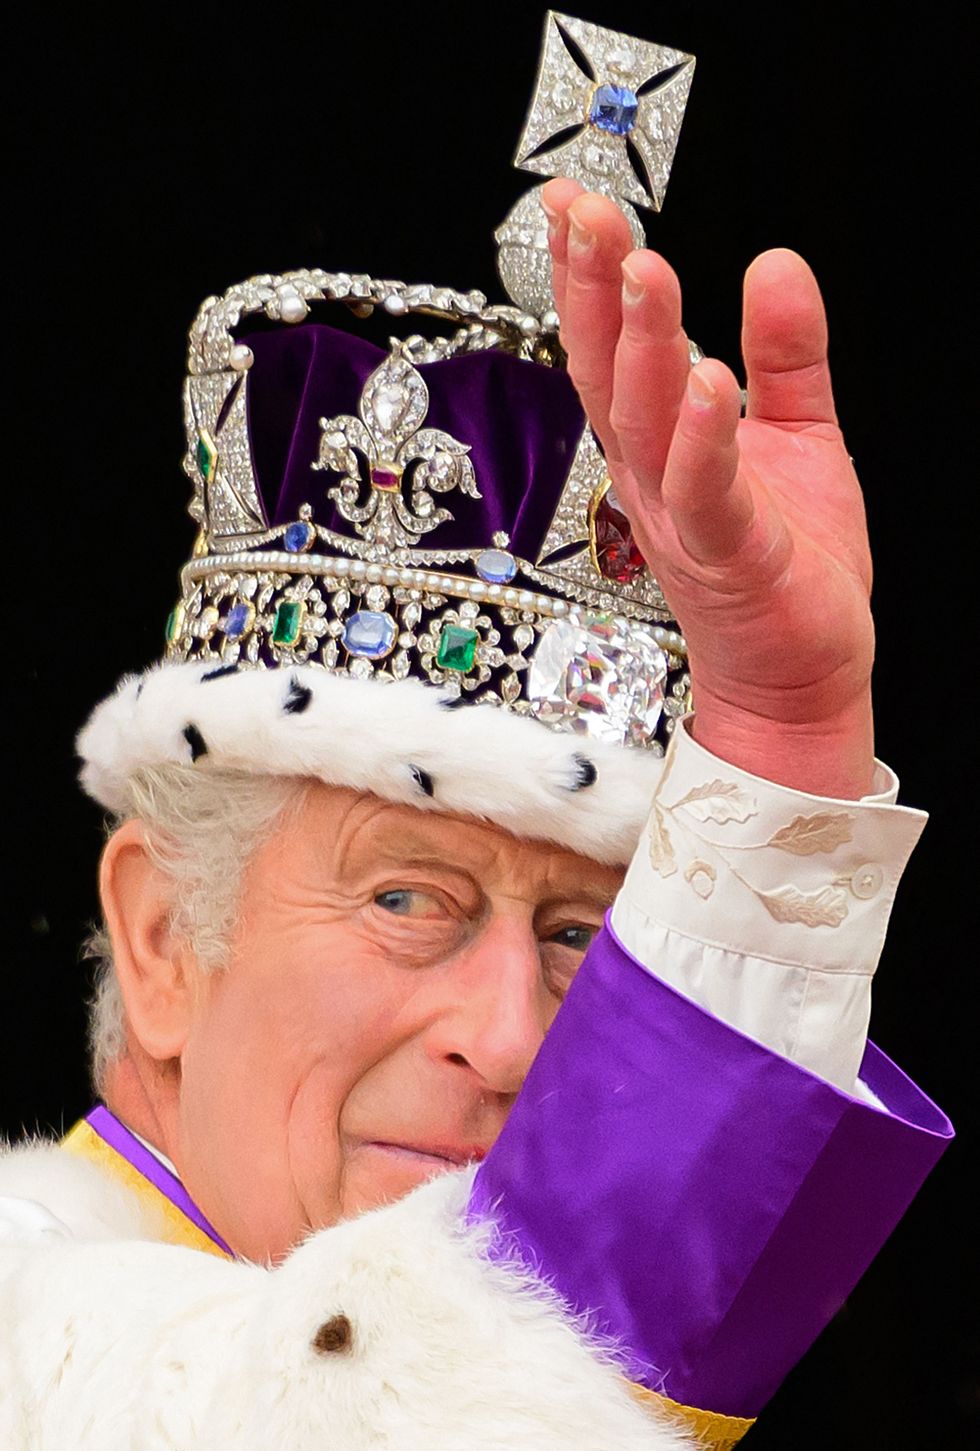 What Crown Did King Charles III Wear at The Coronation?